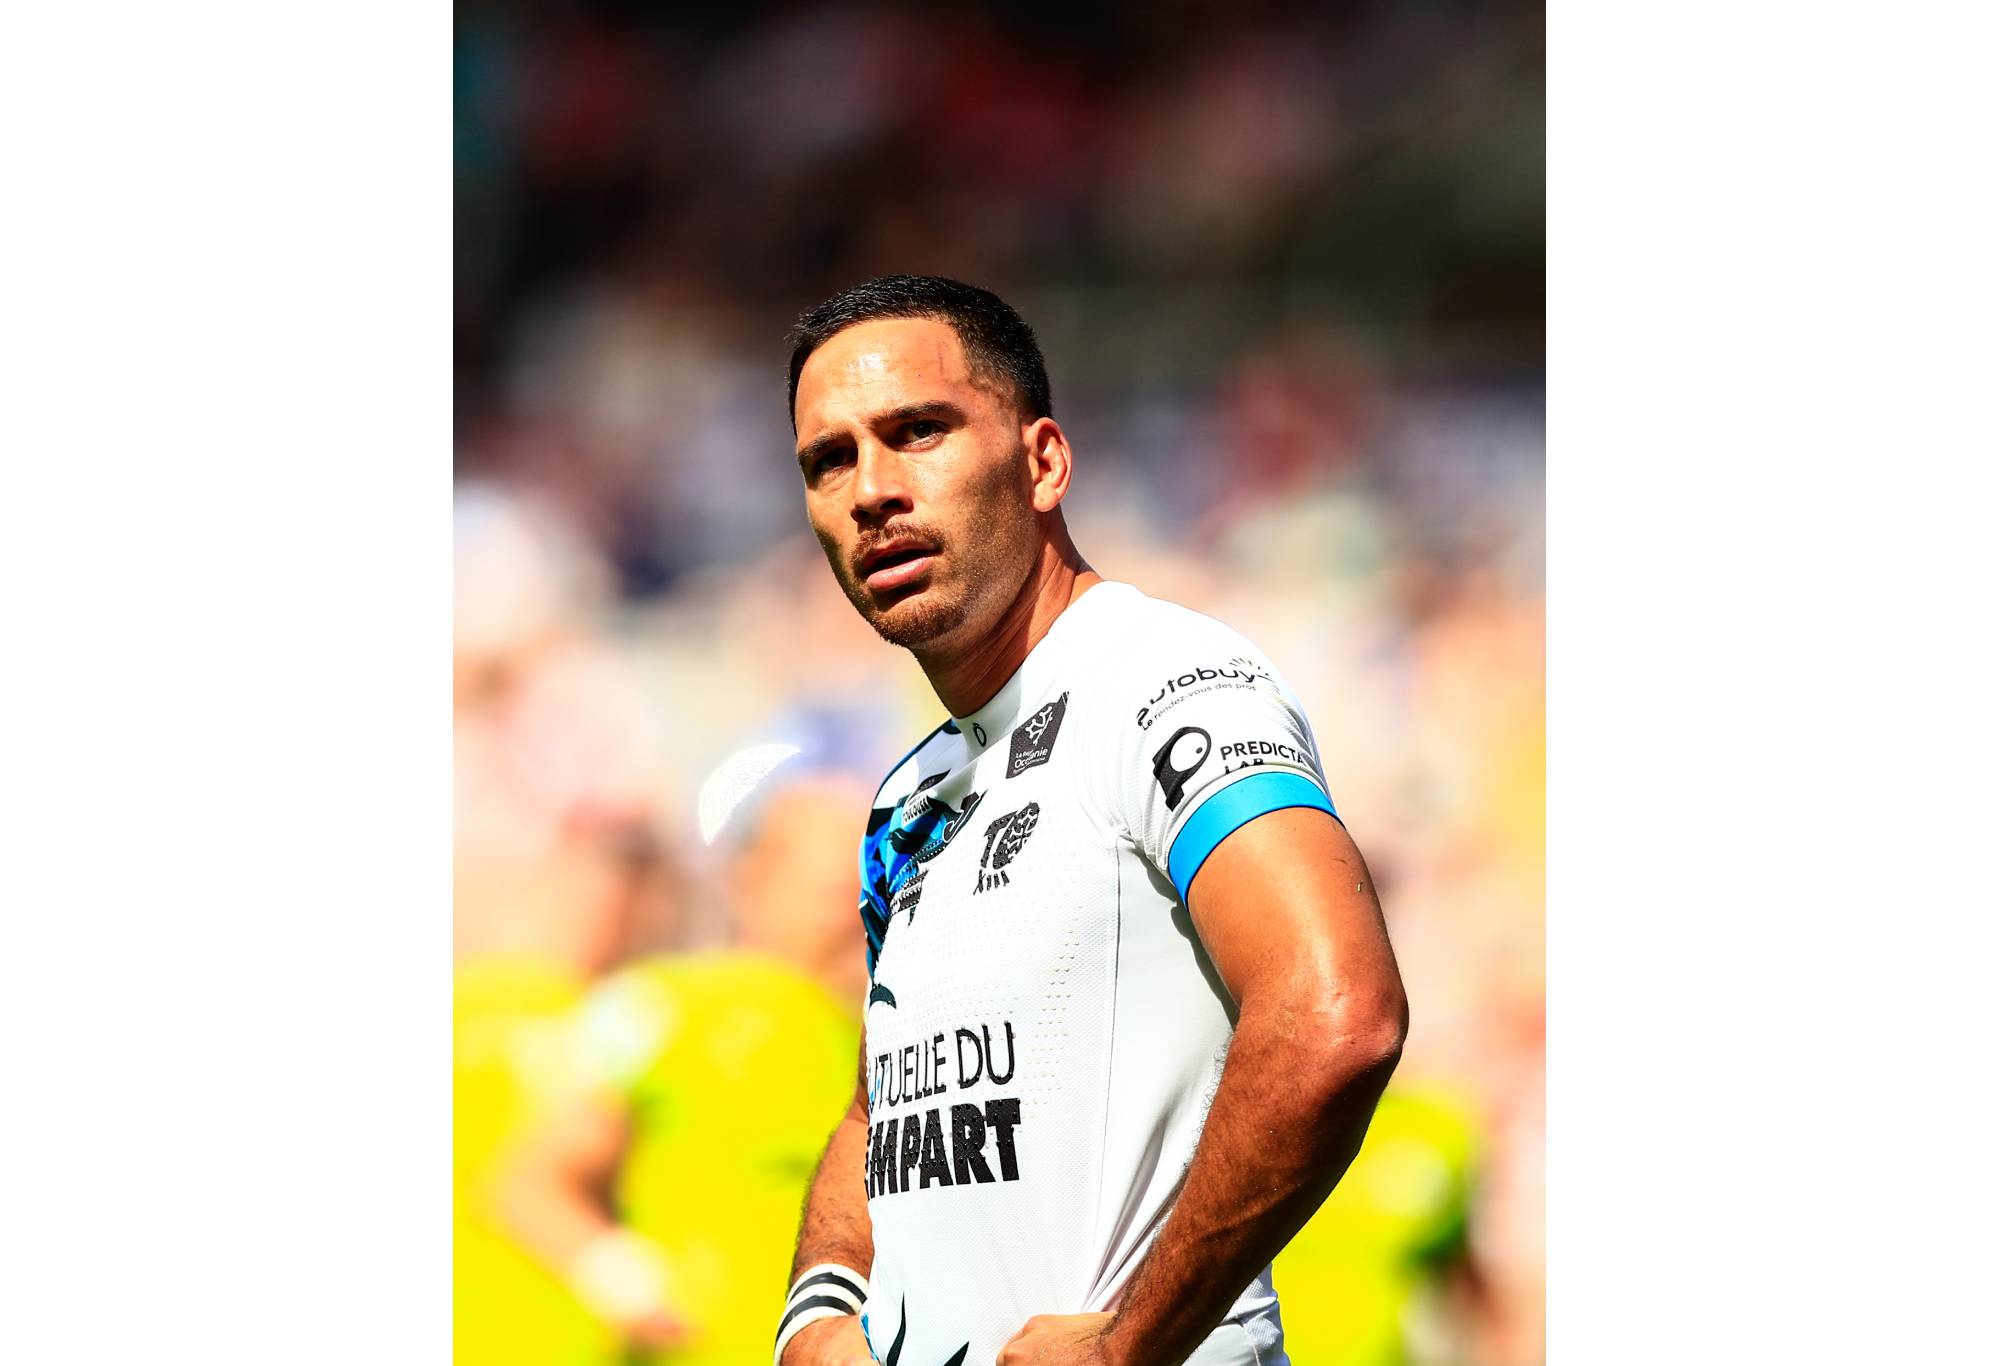 NEWCASTLE UPON TYNE, ENGLAND - JULY 09: Corey Norman during the Betfred Super League Magic Weekend match between Wakefield Trinity and Toulouse Olympique XIII at St James' Park on July 9, 2022 in Newcastle upon Tyne, England. (Photo by Lee Parker - CameraSport via Getty Images)